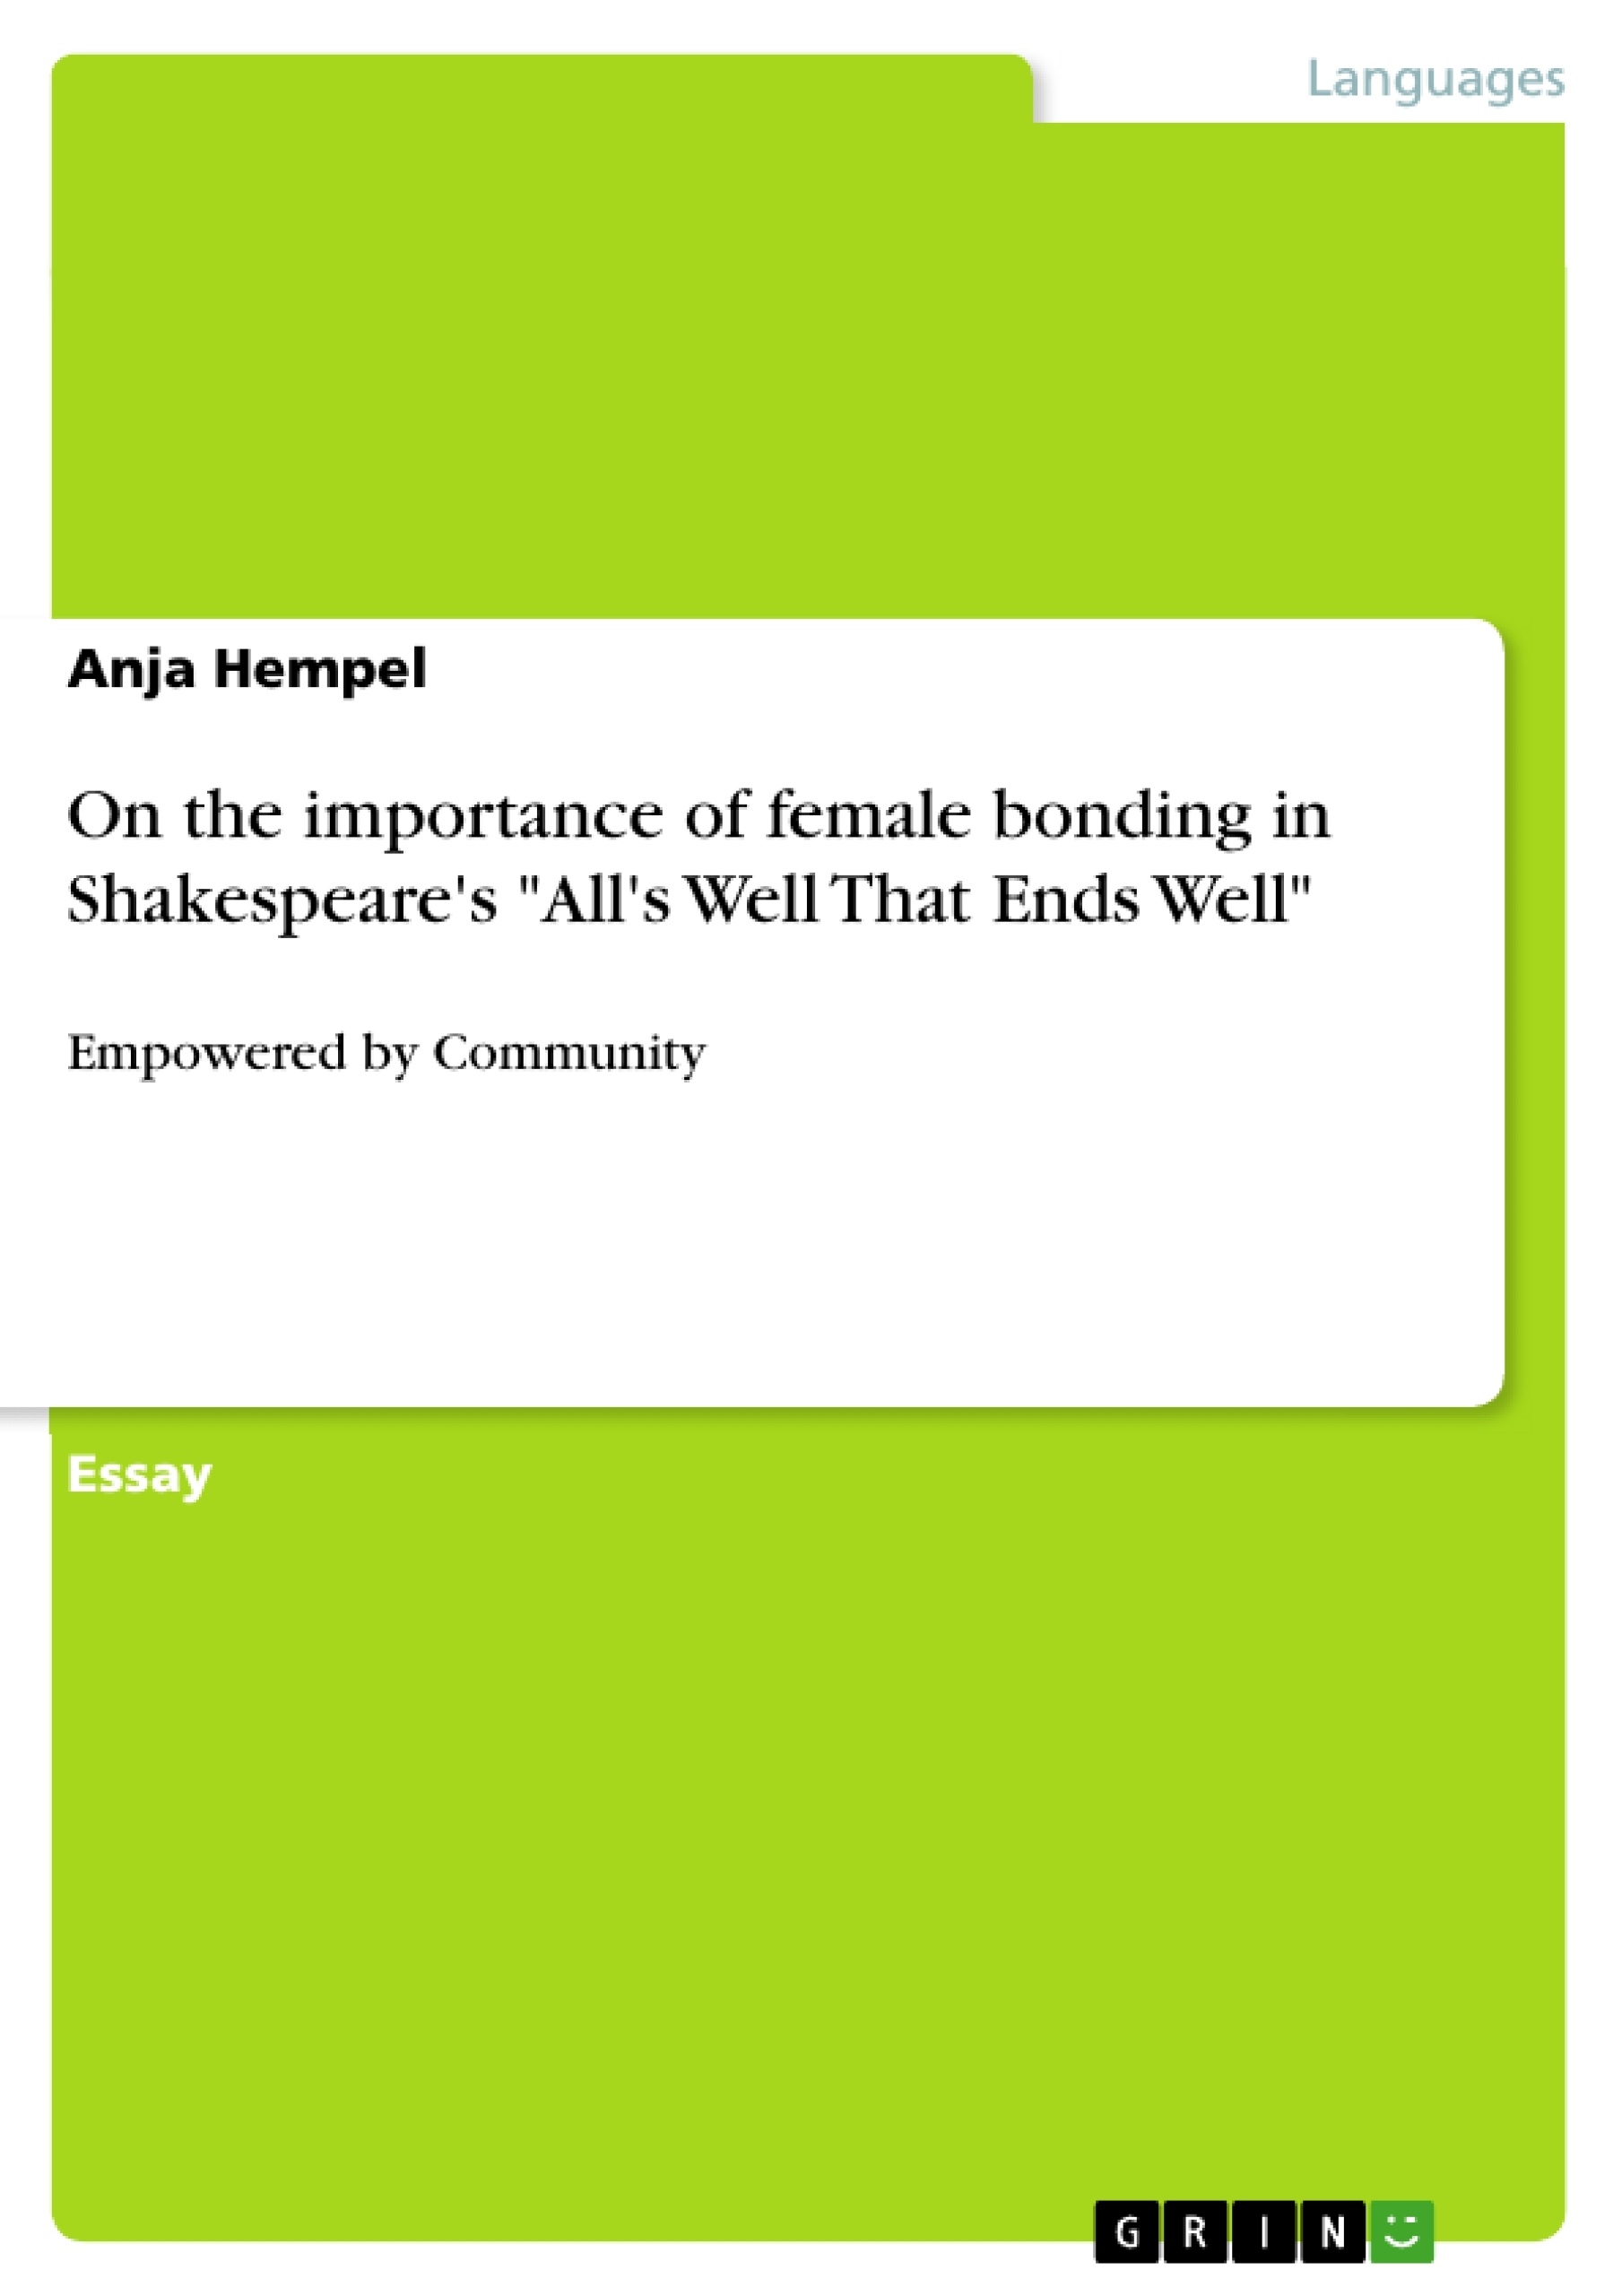 Título: On the importance of female bonding in Shakespeare's "All's Well That Ends Well"